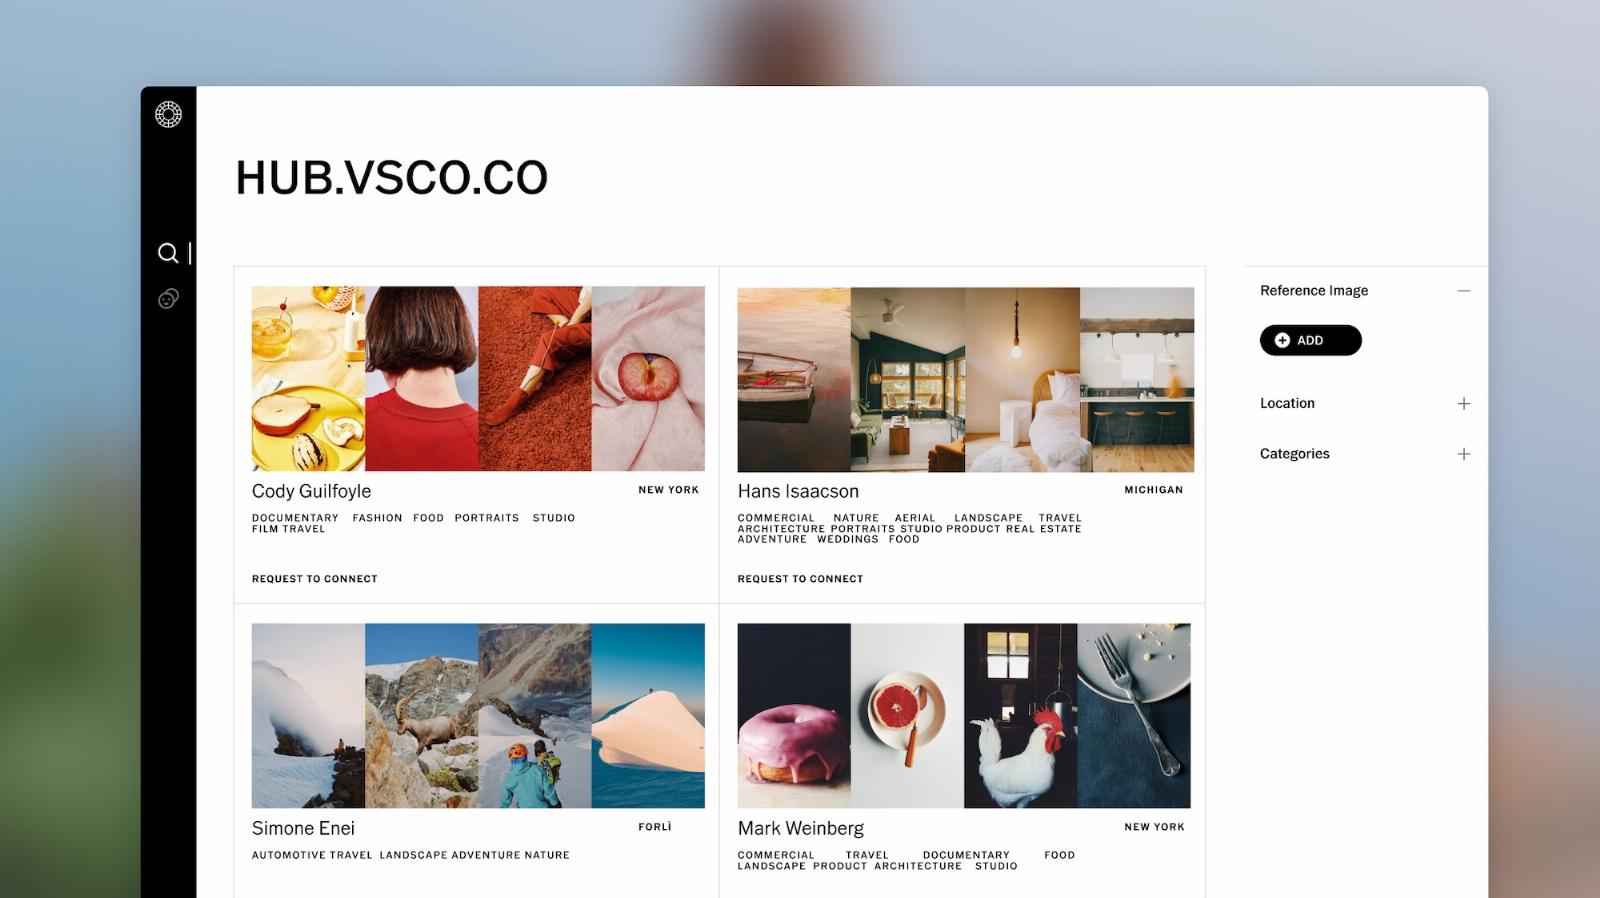 Photo editing app VSCO launches marketplace to connect photographers with brands